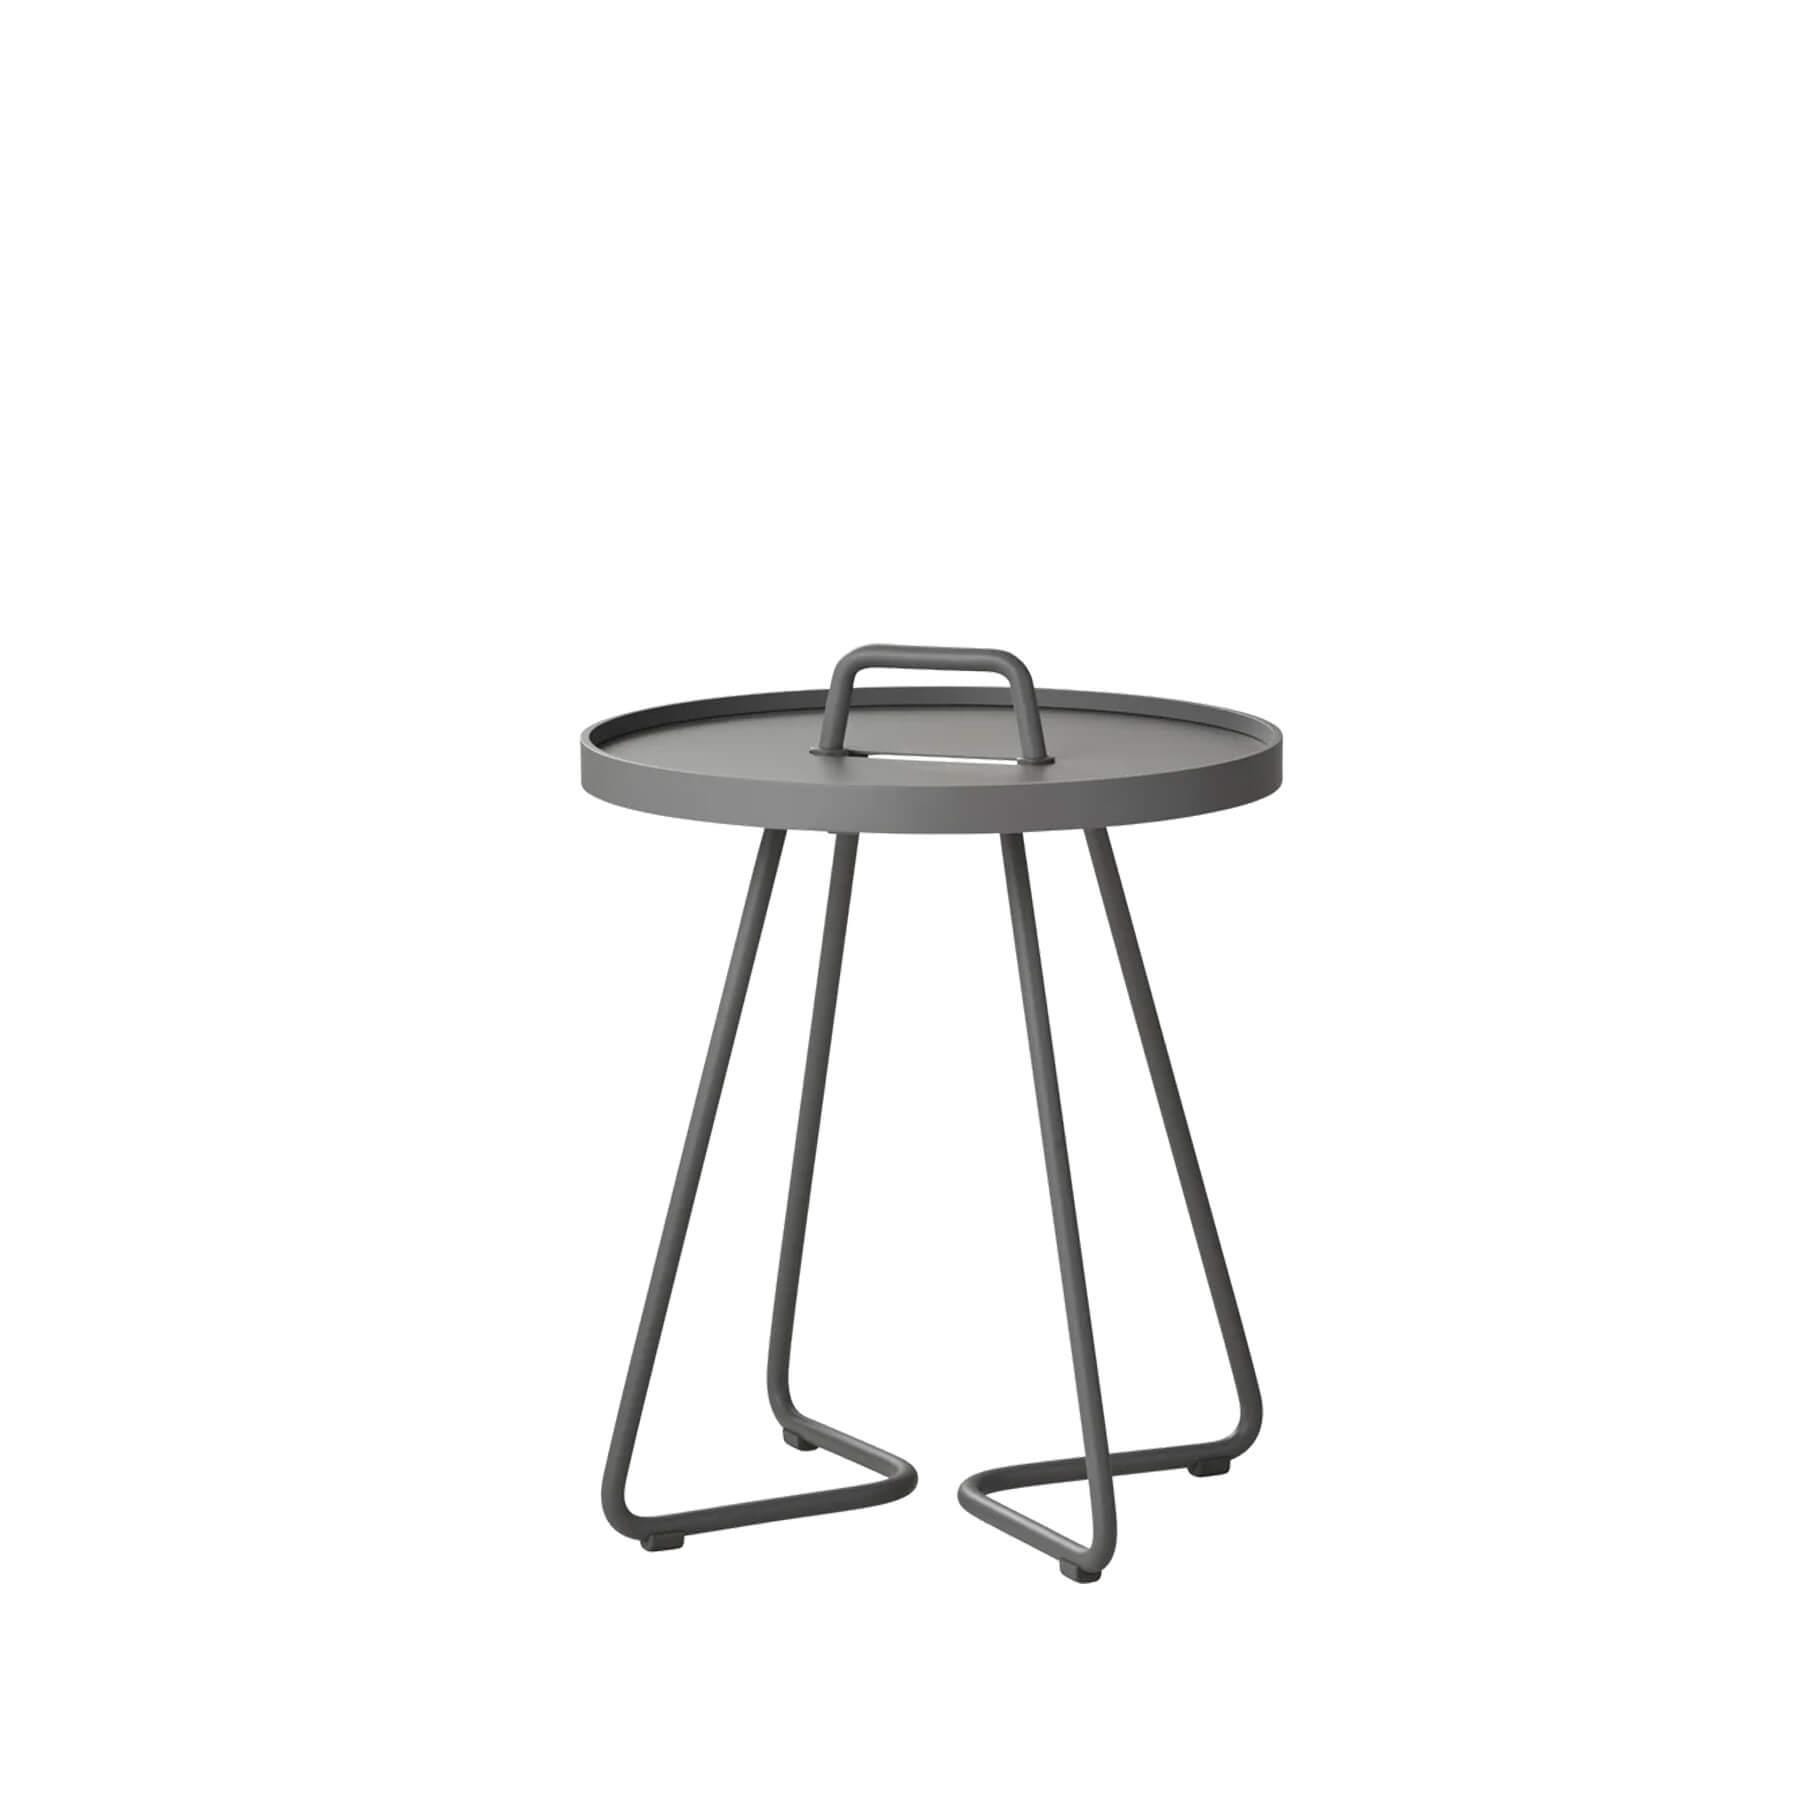 Caneline On The Move Side Table Mini Light Grey Designer Furniture From Holloways Of Ludlow